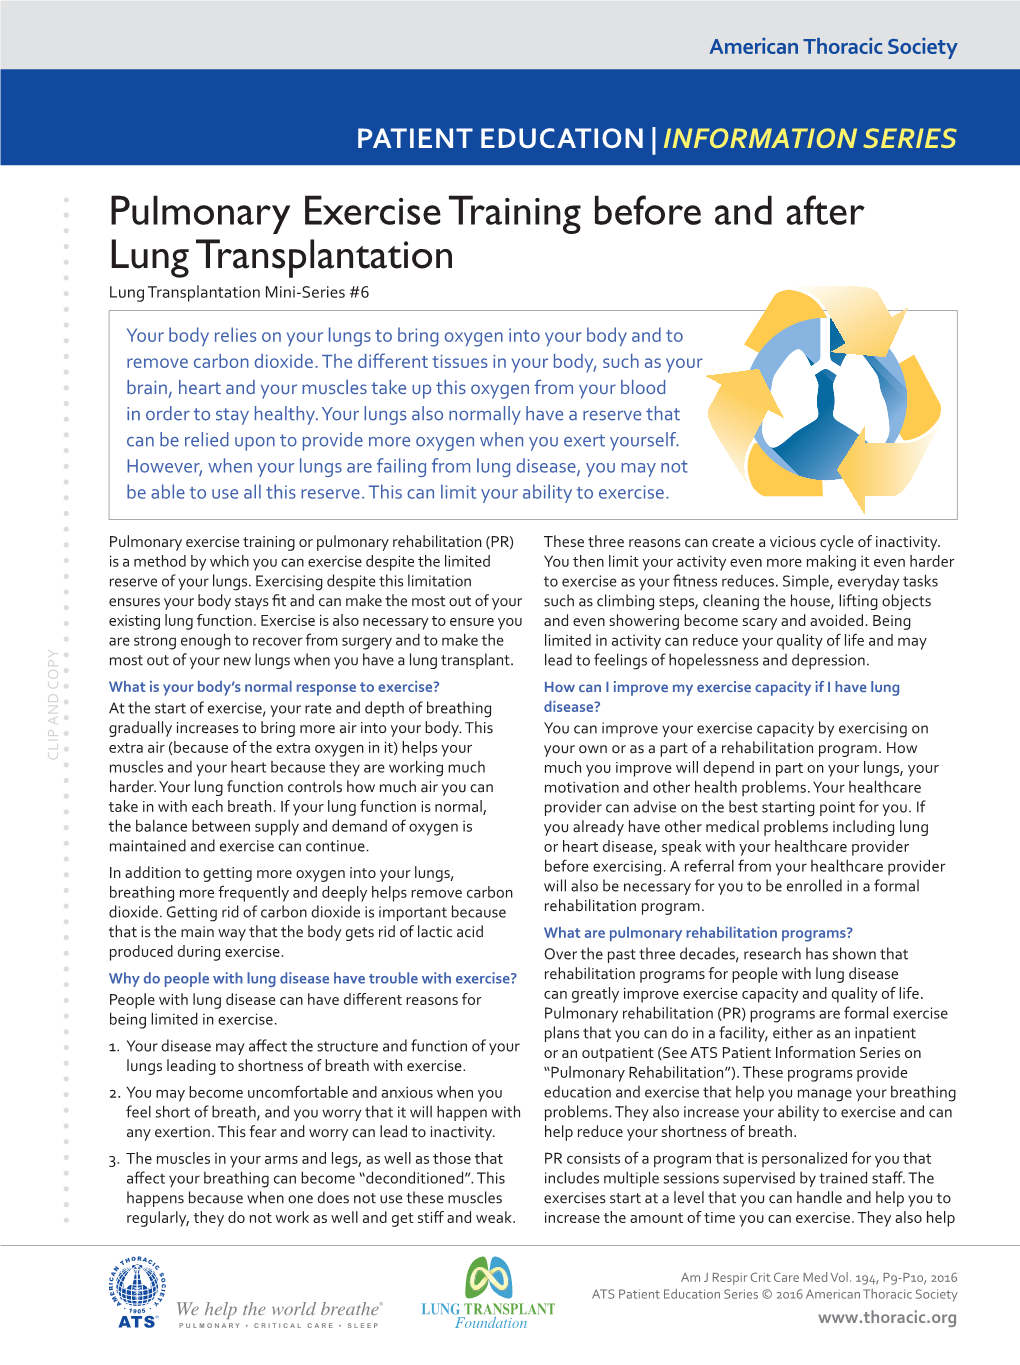 Pulmonary Exercise Training Before and After Lung Transplantation Lung Transplantation Mini-Series #6